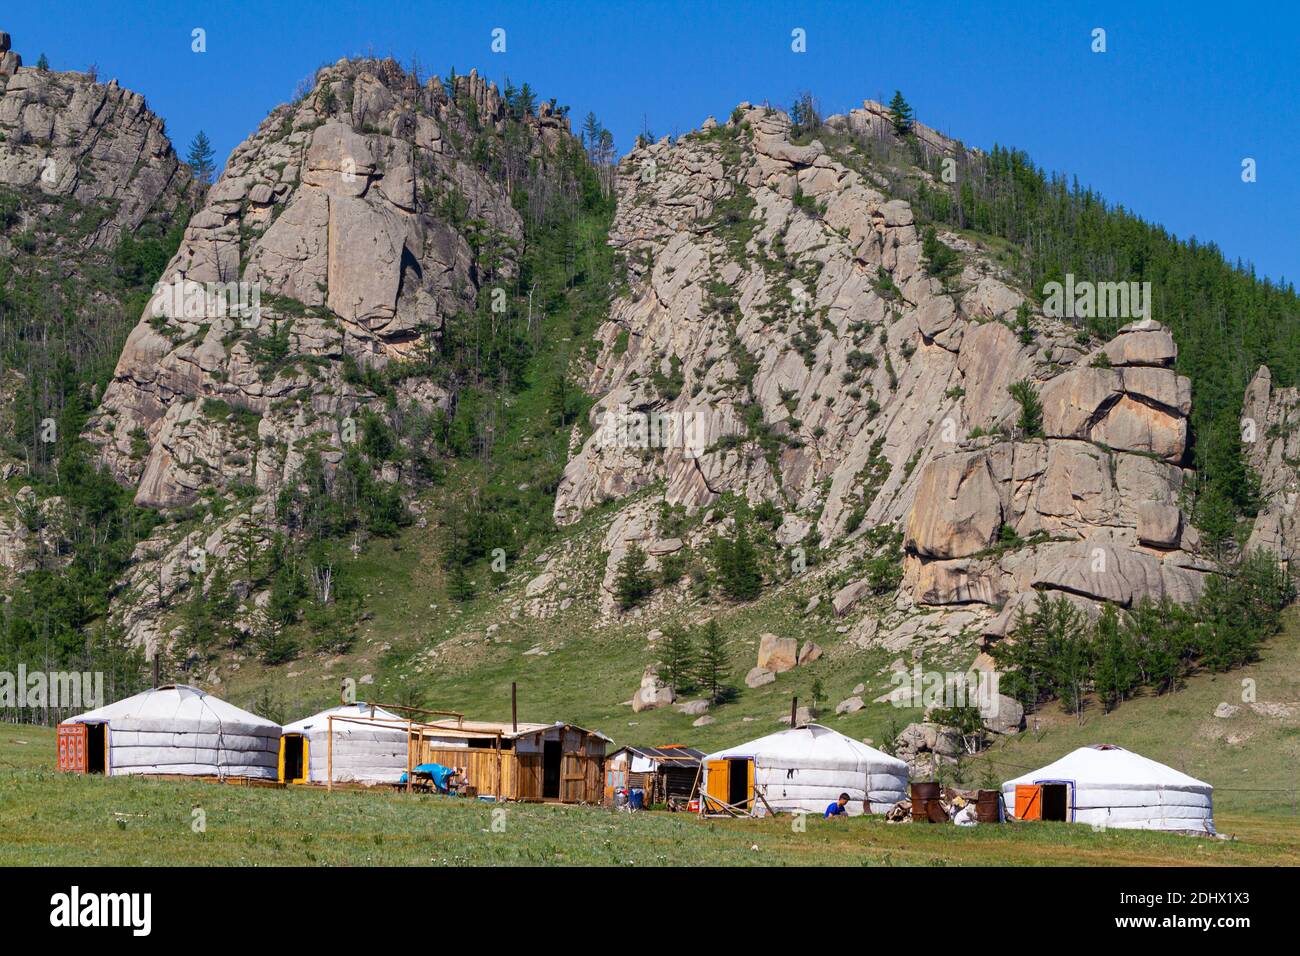 Yurt Camp in the landscape of Mongolia Stock Photo